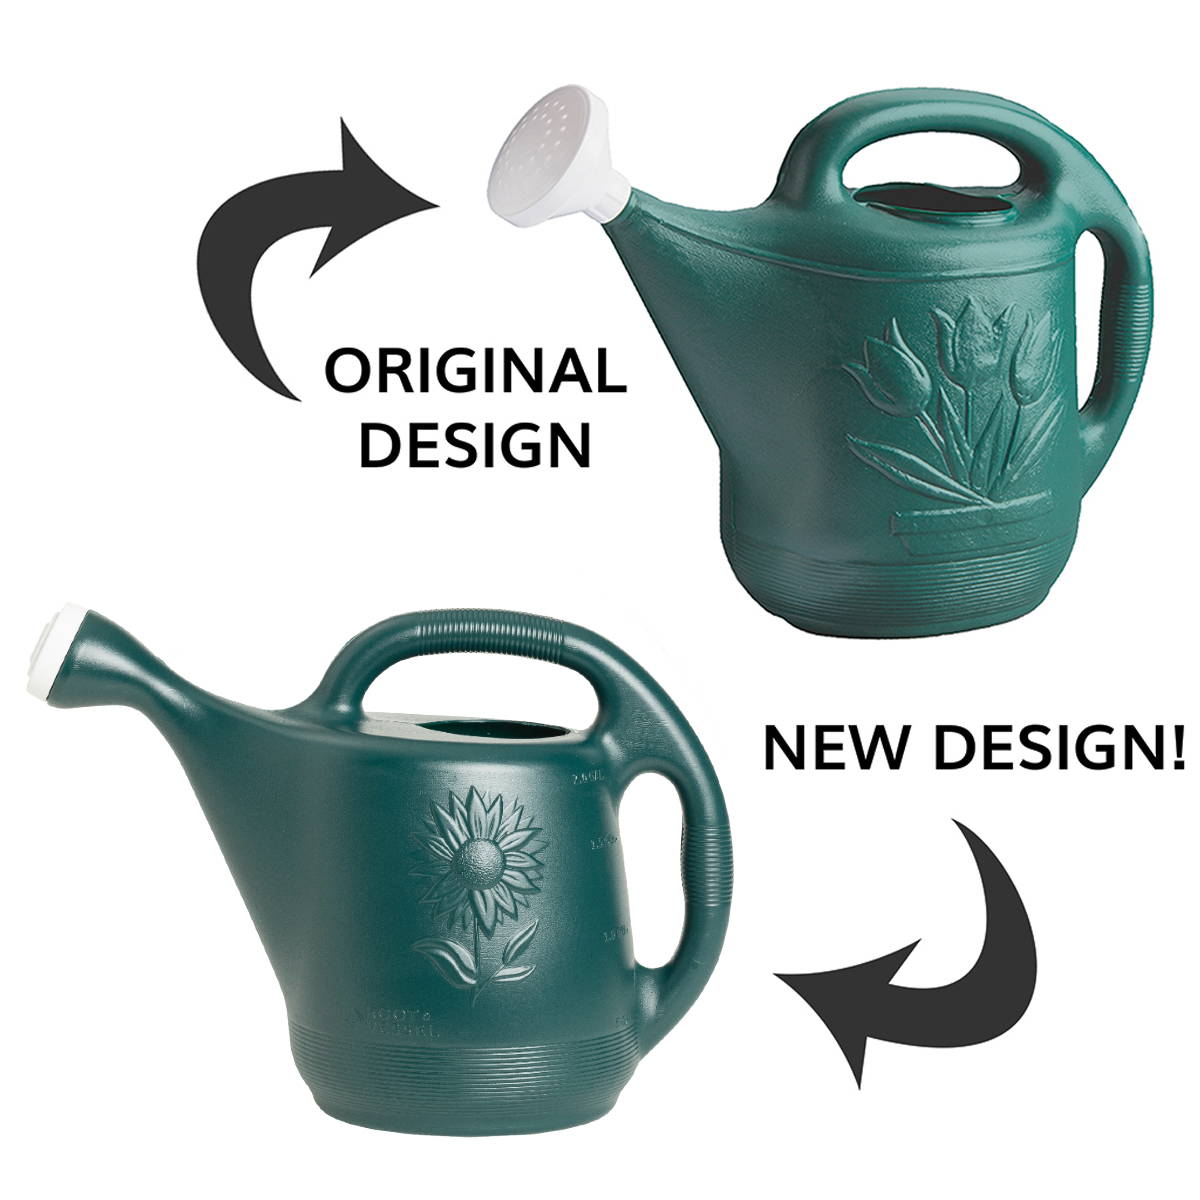 Graphic showing the old classic watering can design compared to the new sunflower 2 gallon green watering can